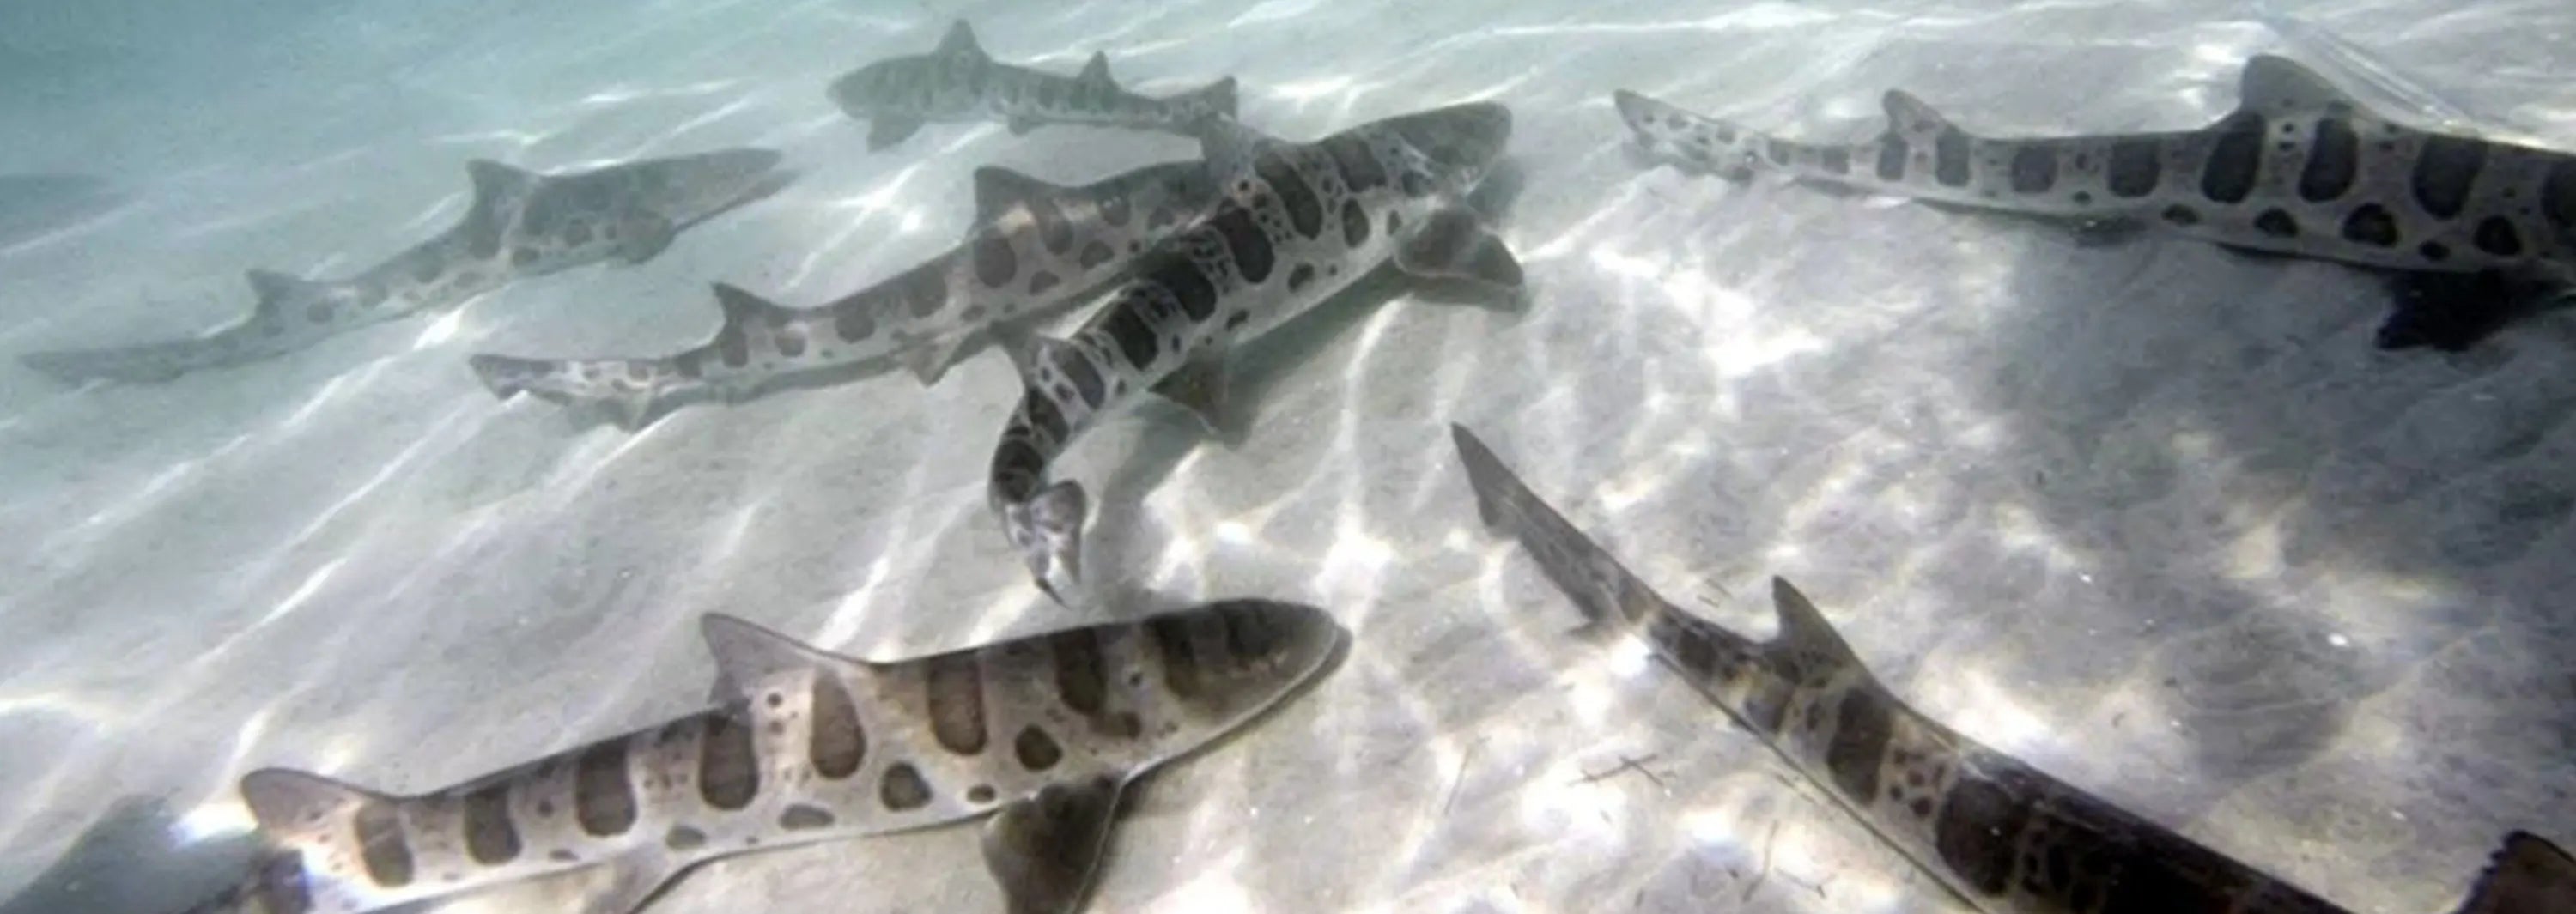 Leopard Sharks in shallow water during kayak tour in San Diego